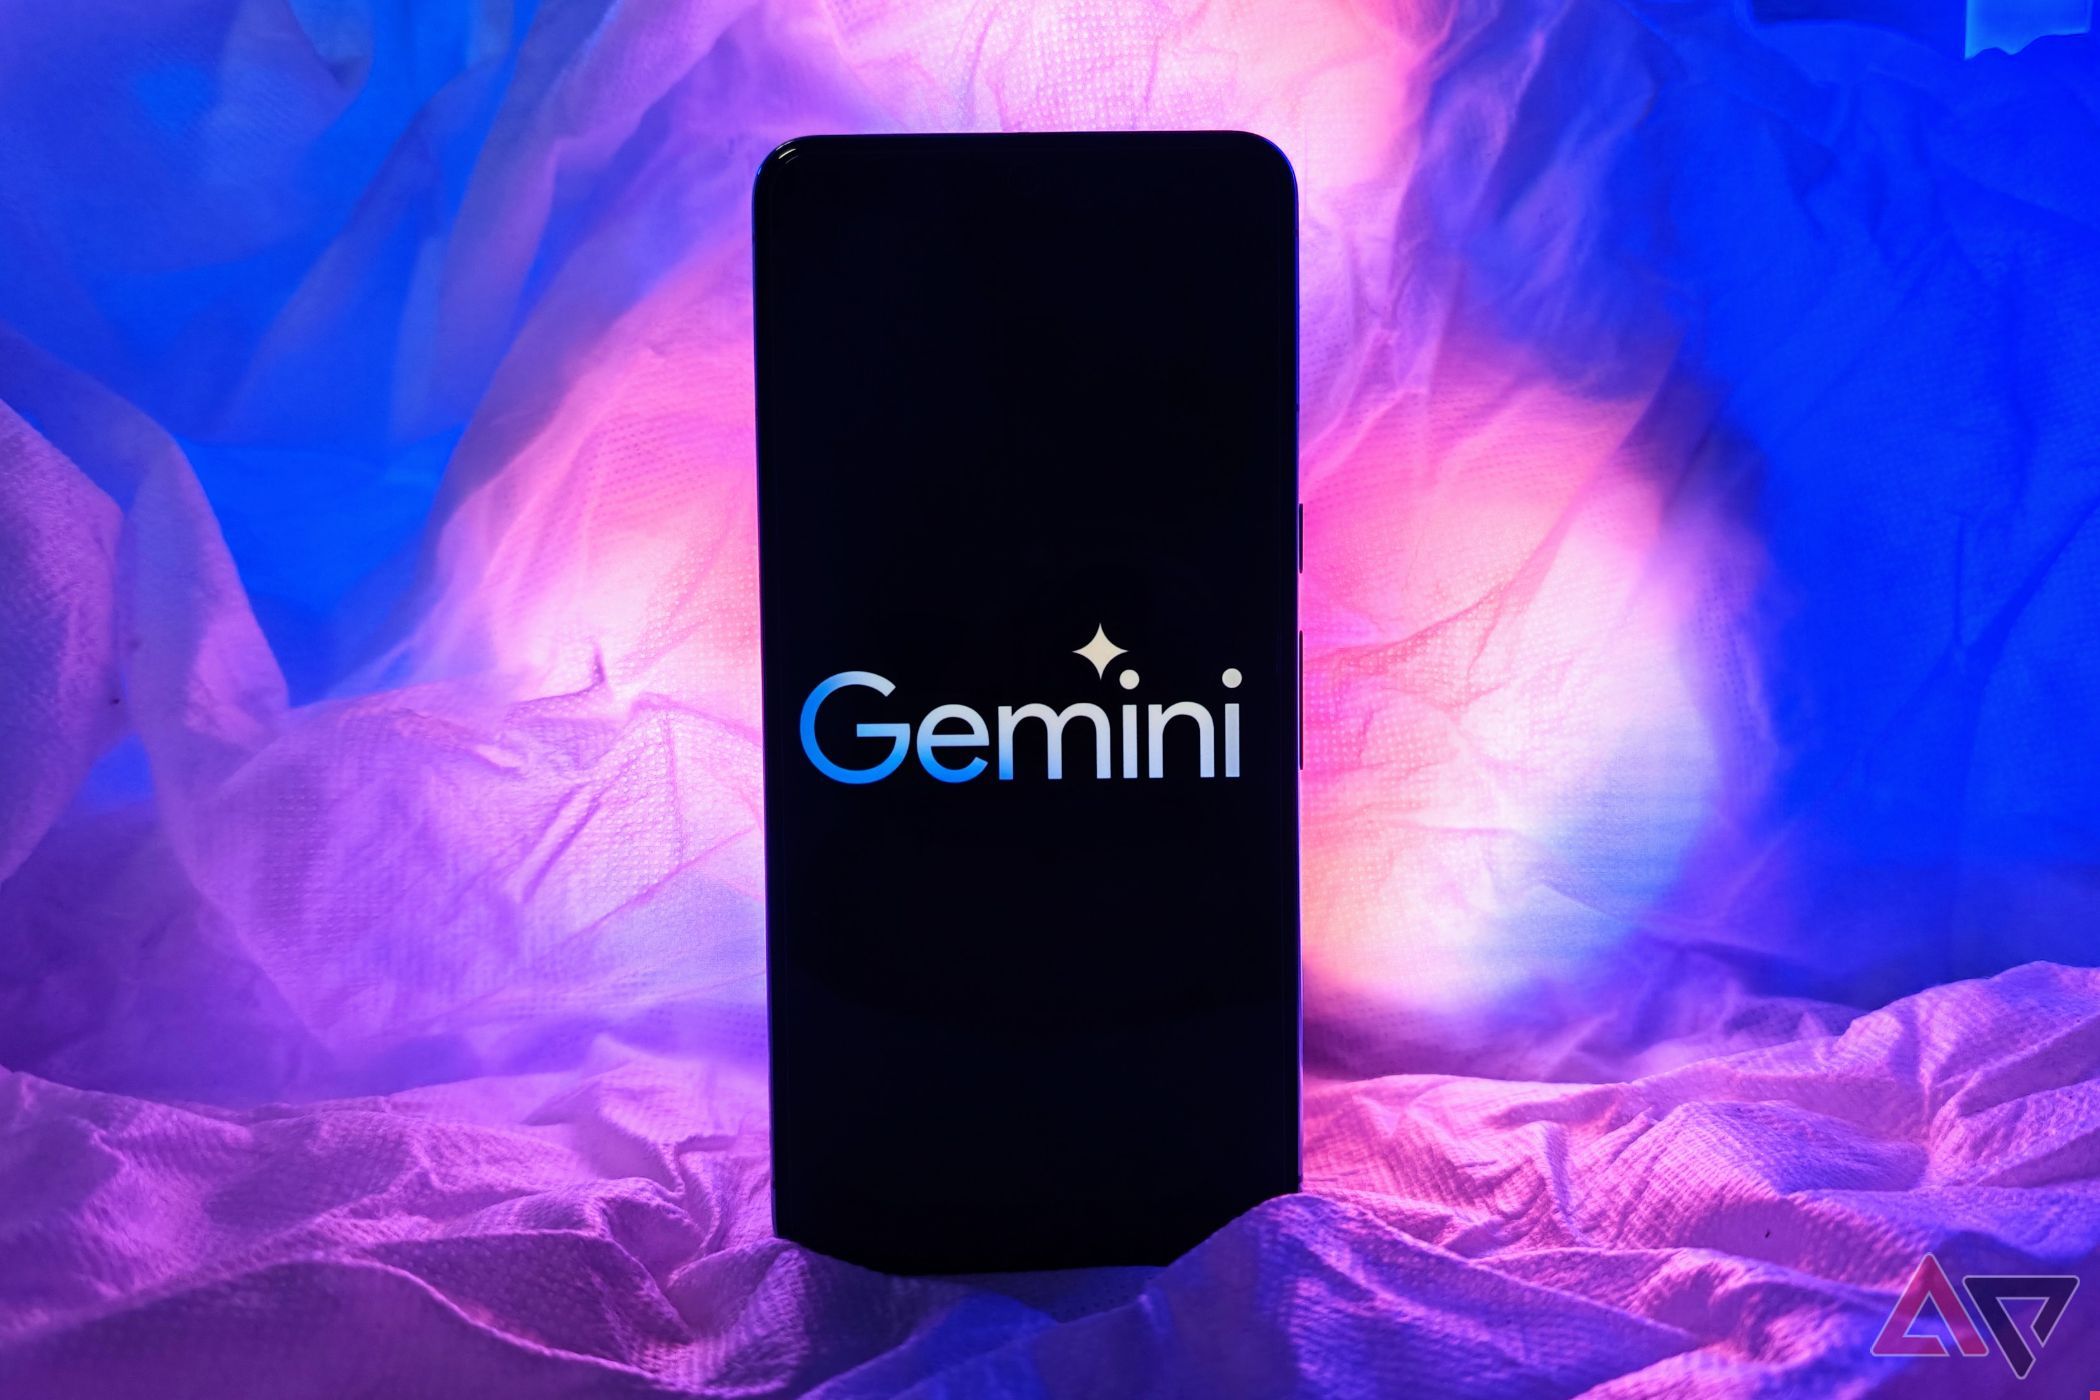 Google Pixel 8 Pro with Gemini logo on the screen with RGB lights behind